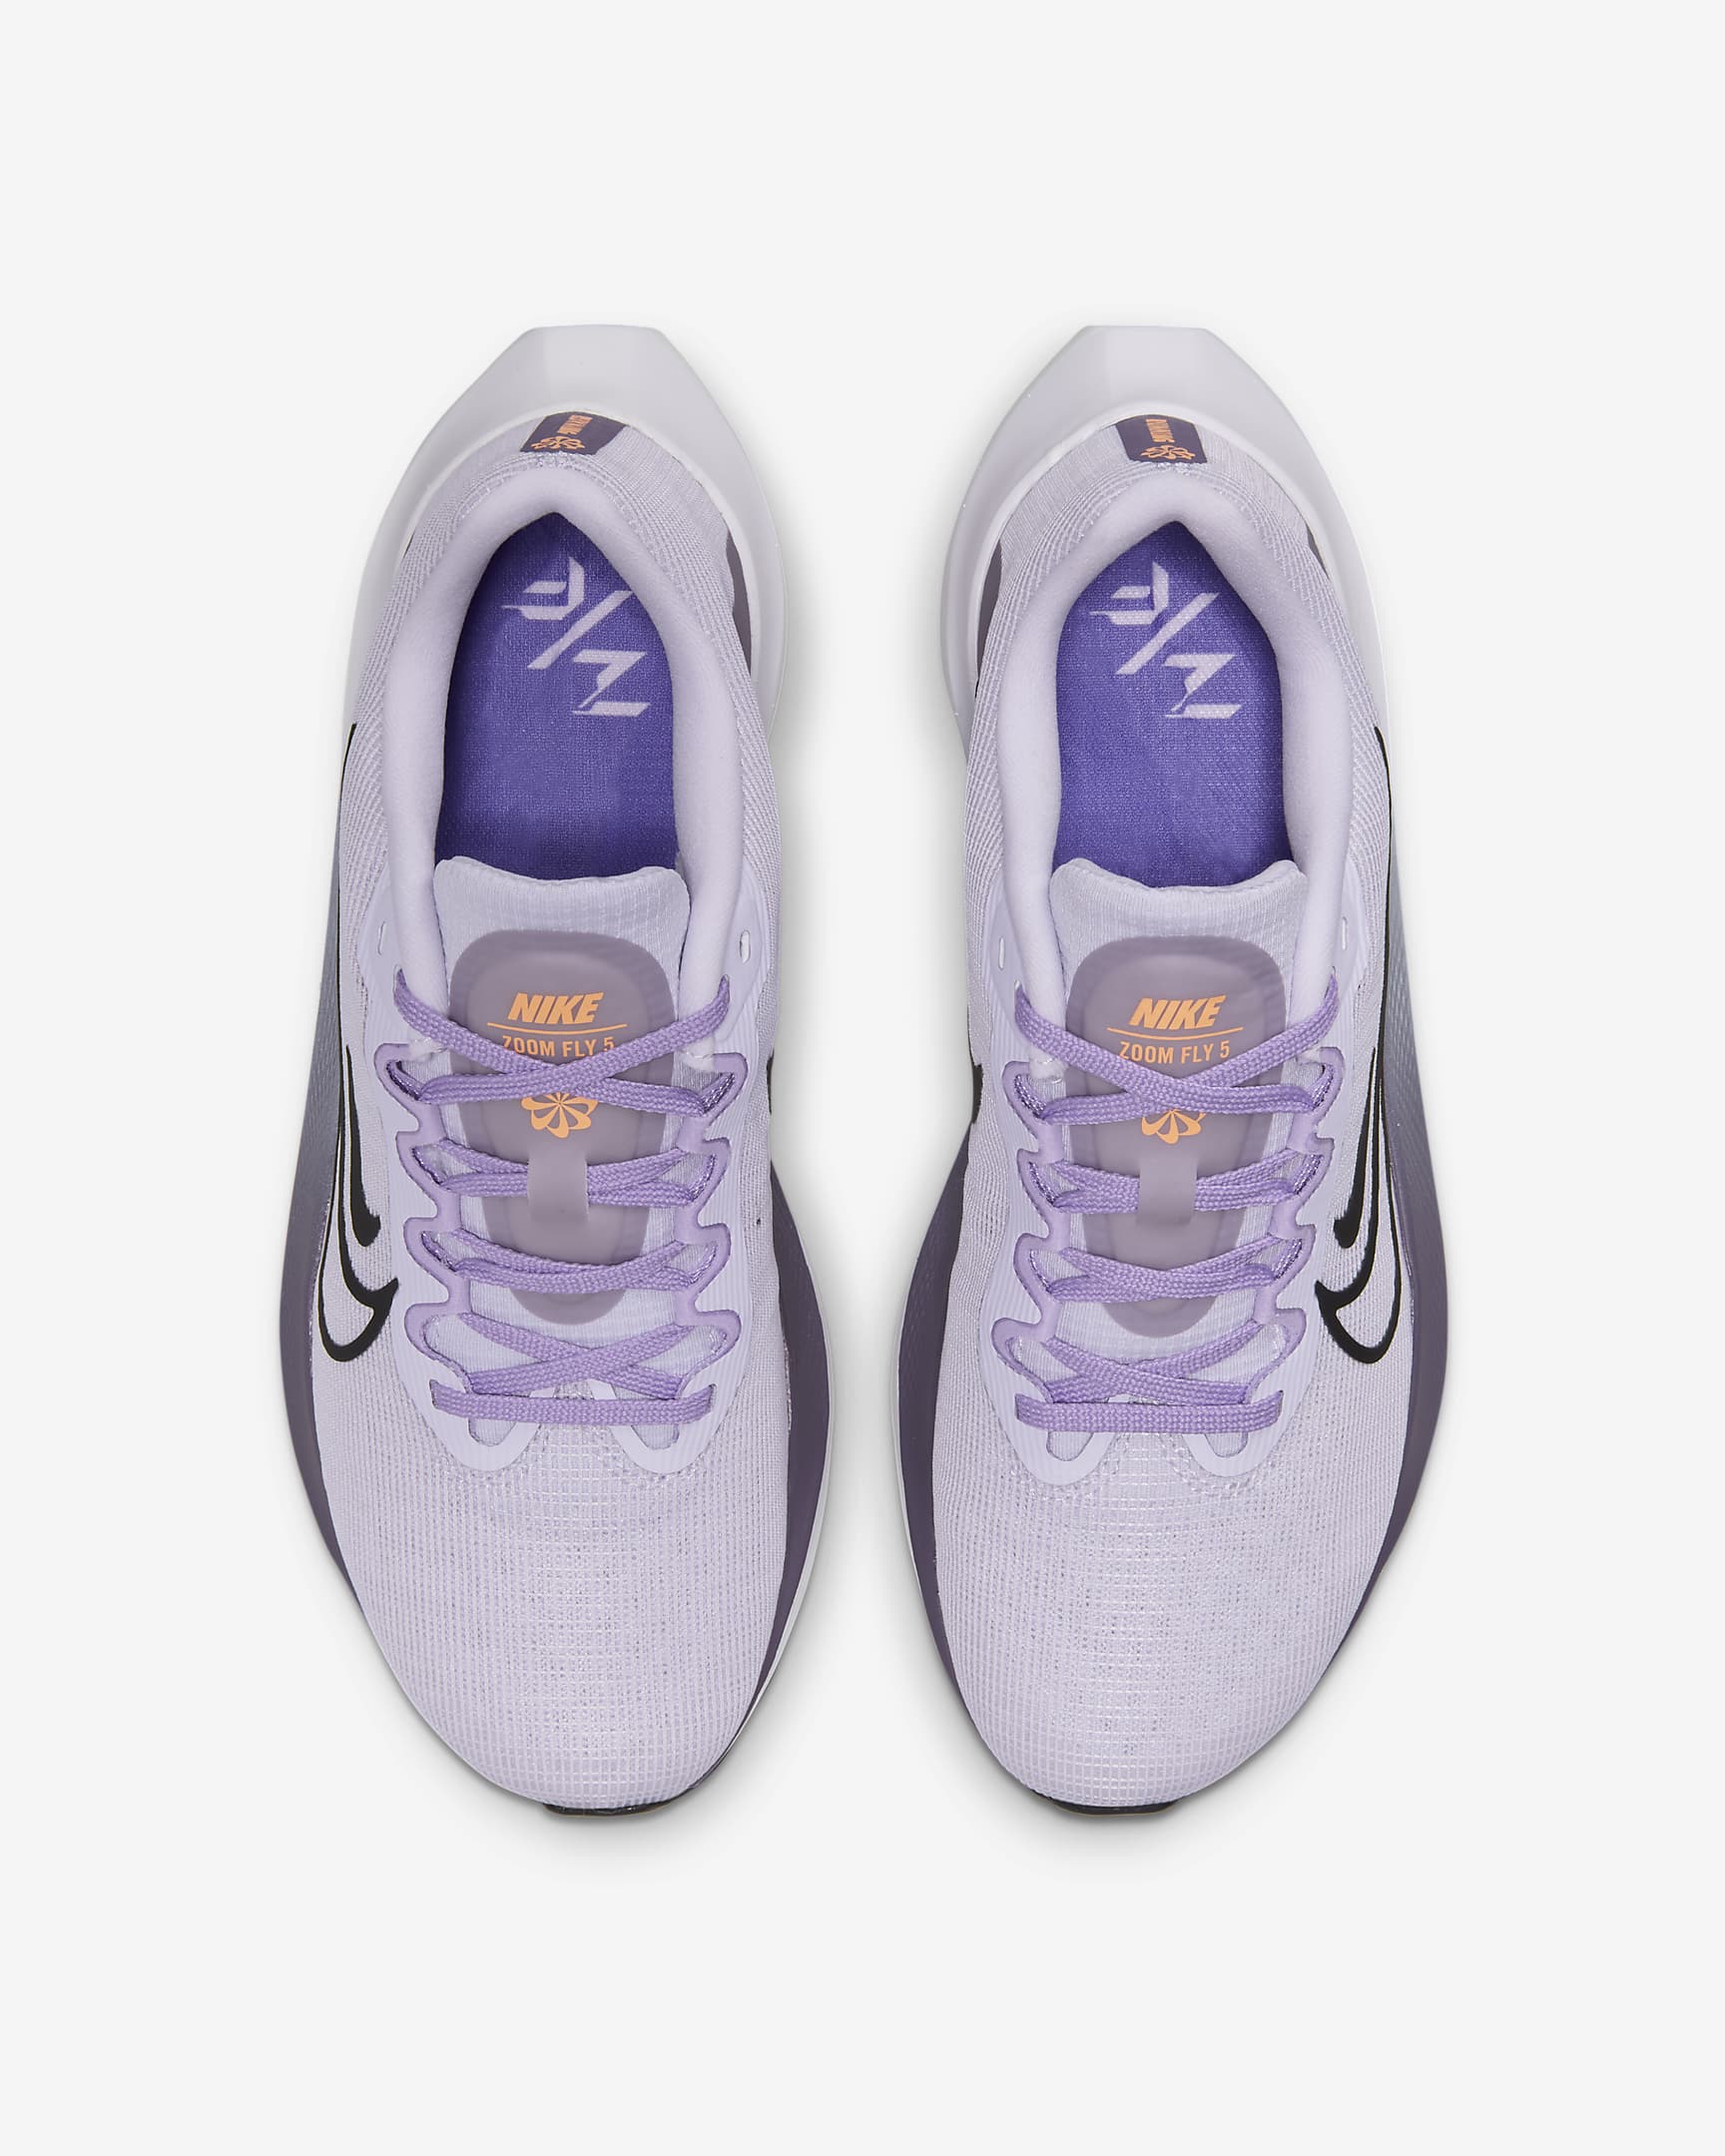 Womens Nike Zoom Fly 5 - The Running Company - Running Shoe Specialists